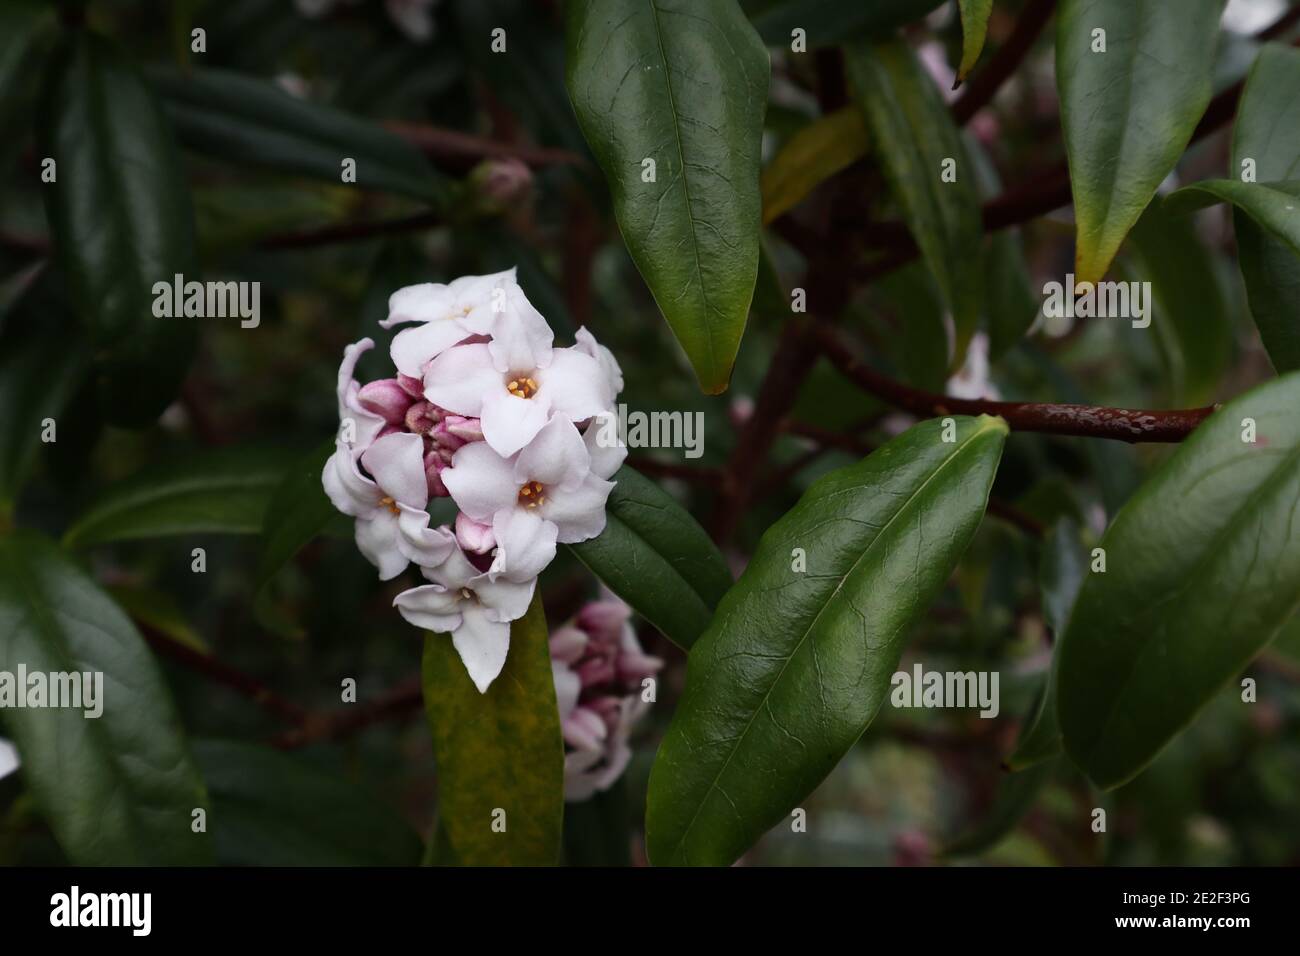 Daphne odora Small clusters of highly scented white flowers,  January, England, UK Stock Photo